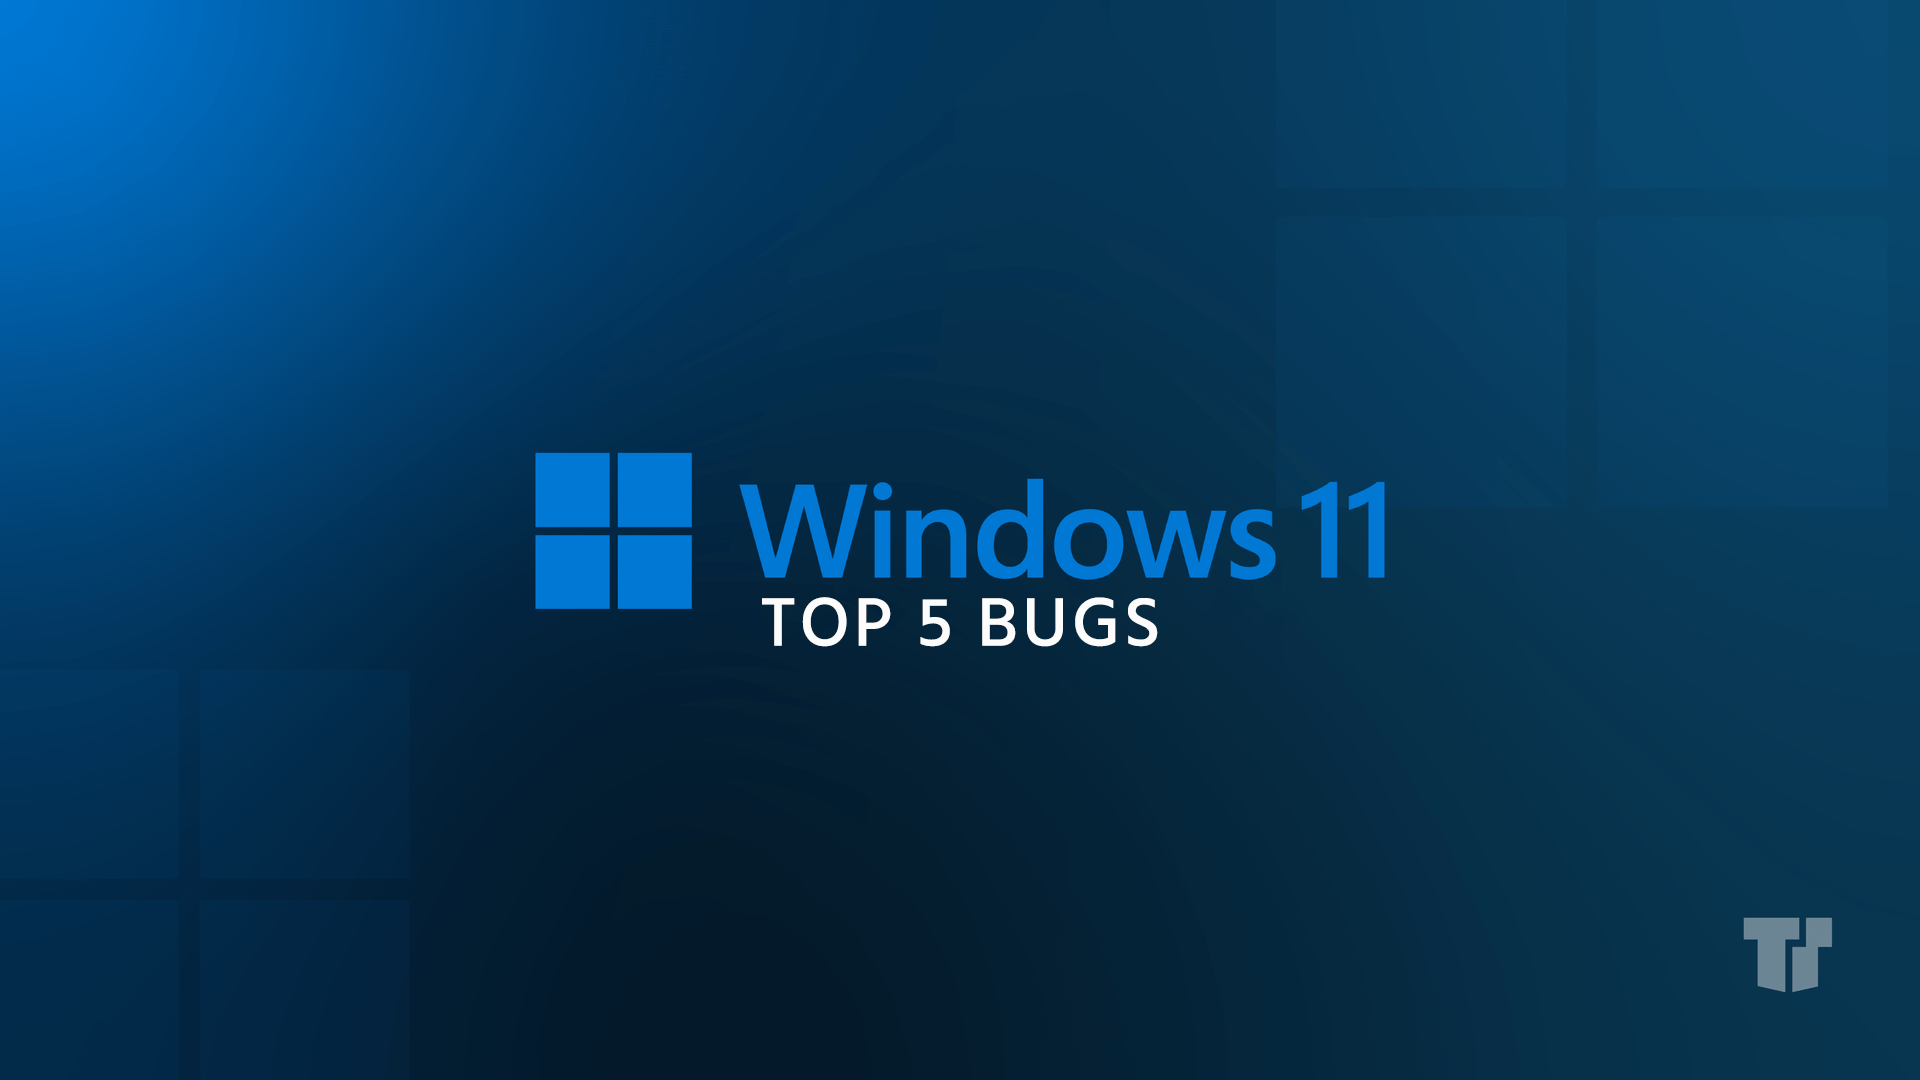 Windows 11: Top 5 Bugs and How to Fix Them cover image